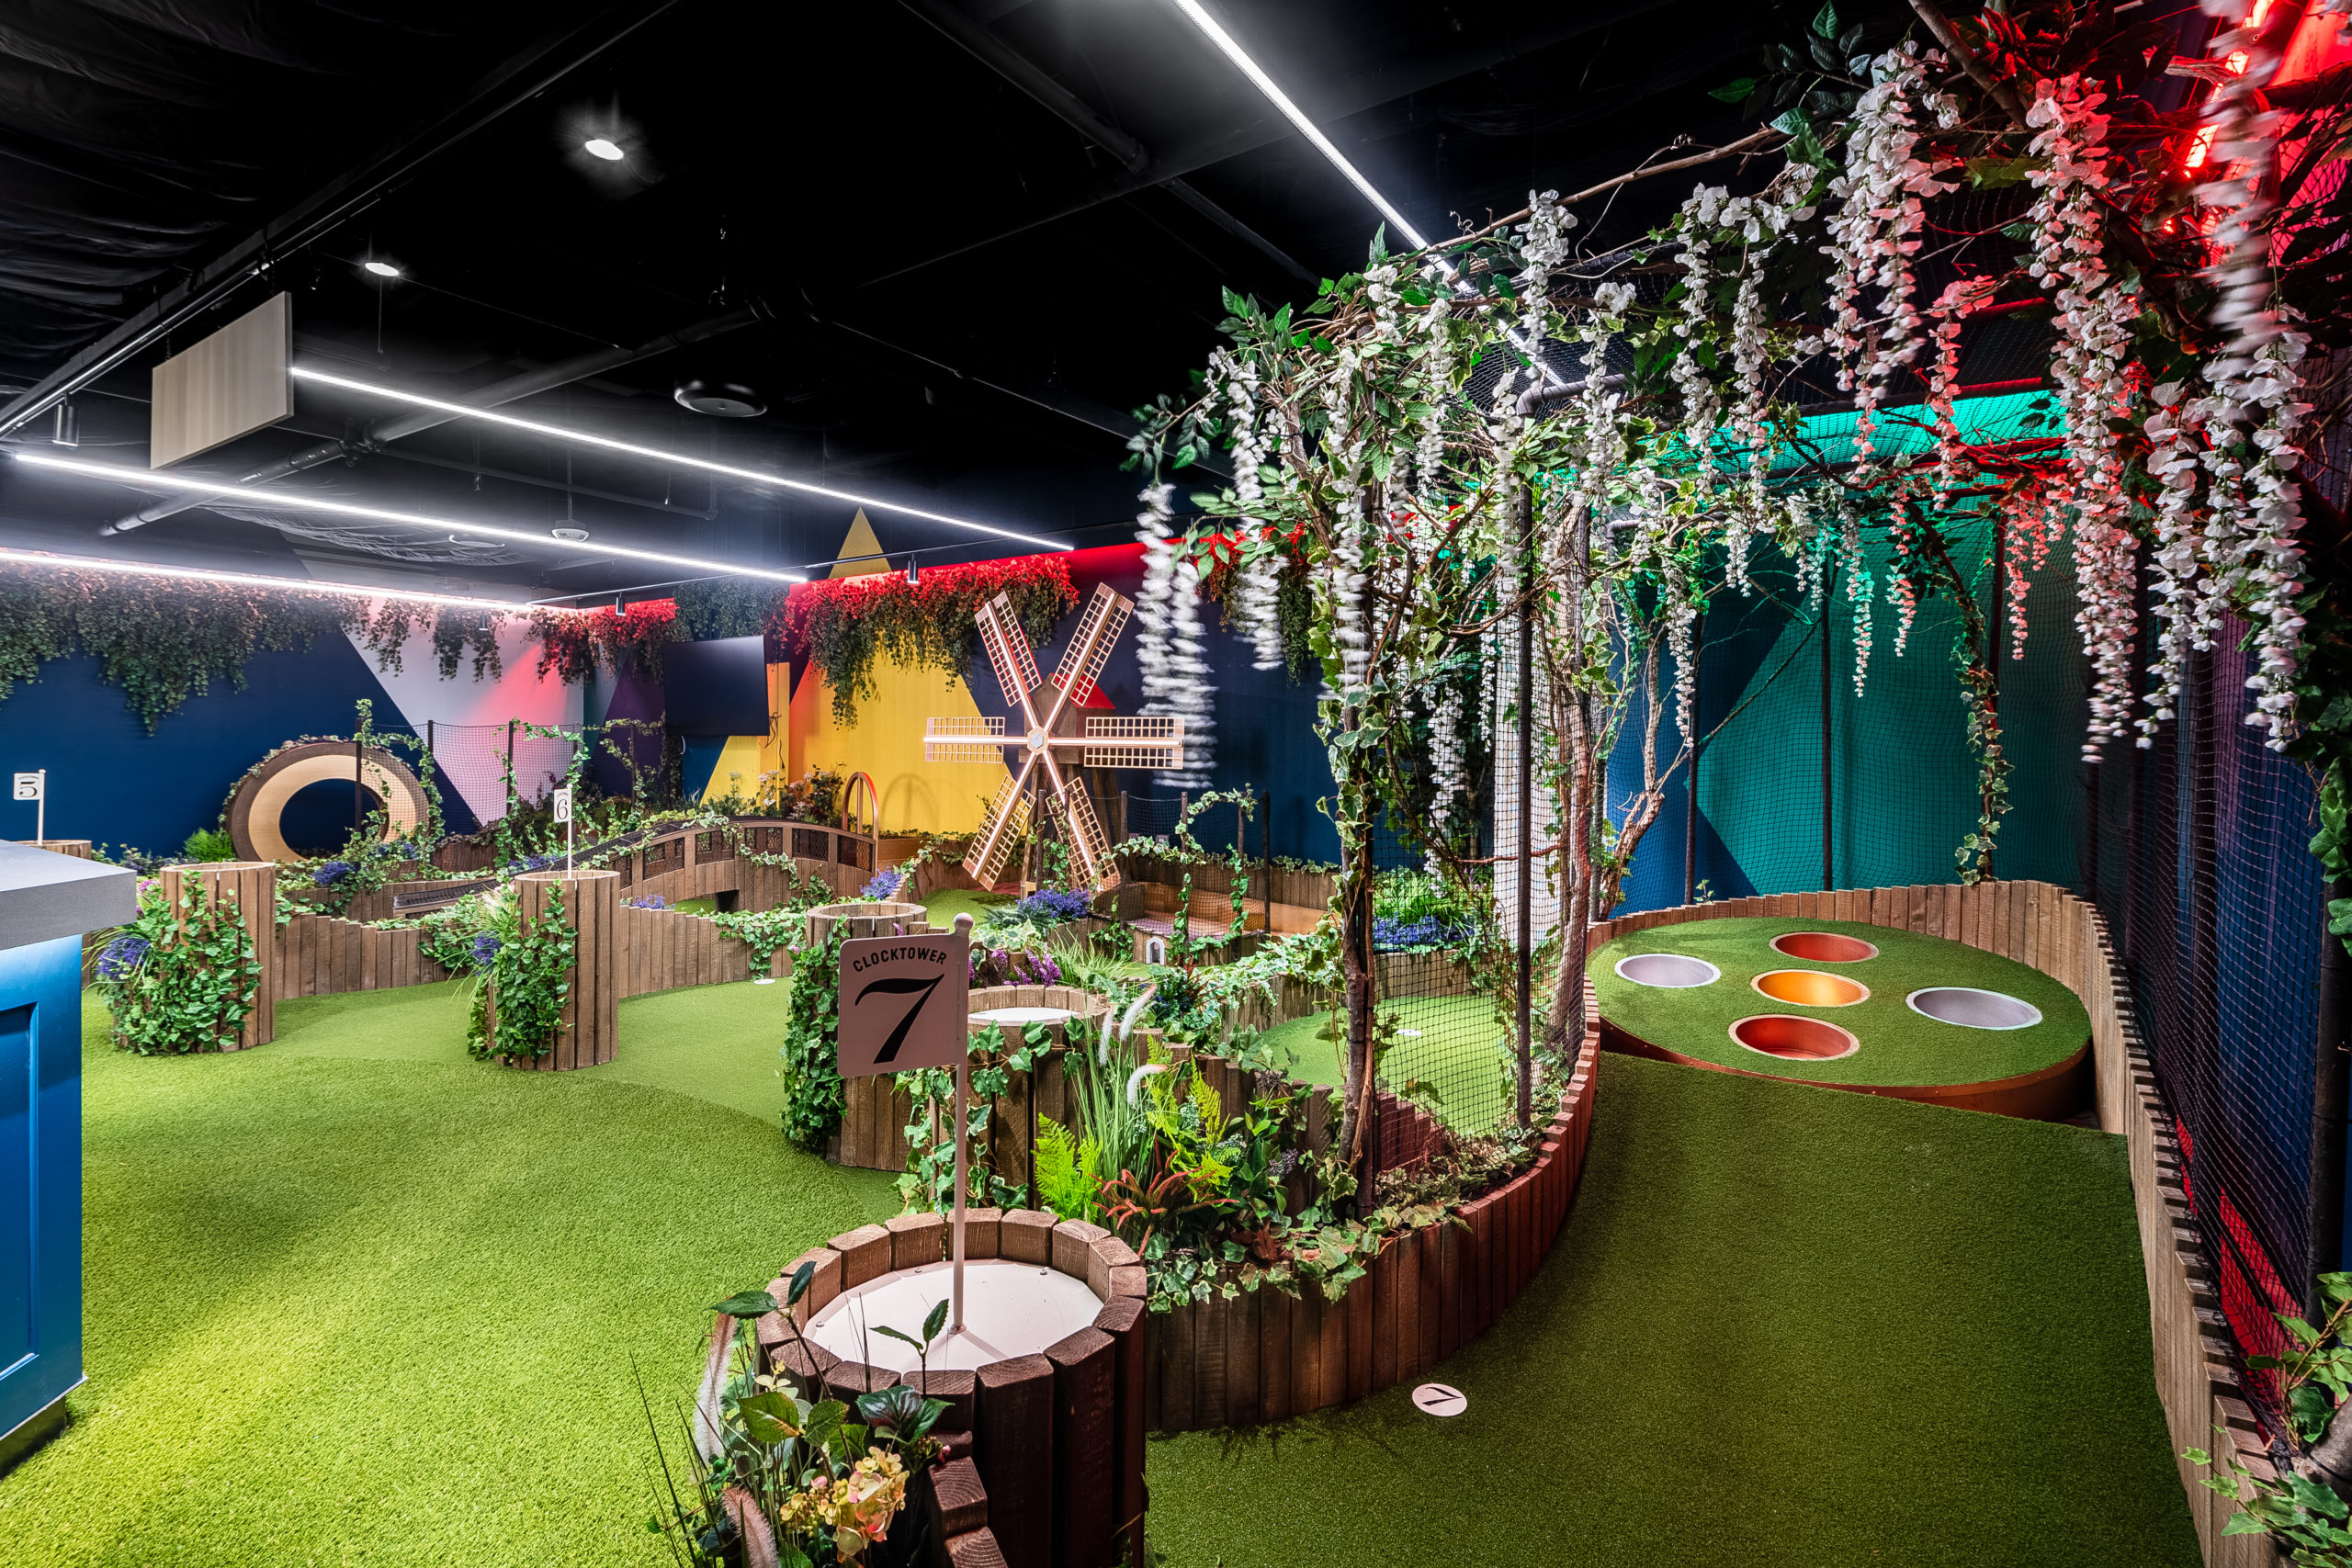 Swingers Brings Crazy Golf to picture